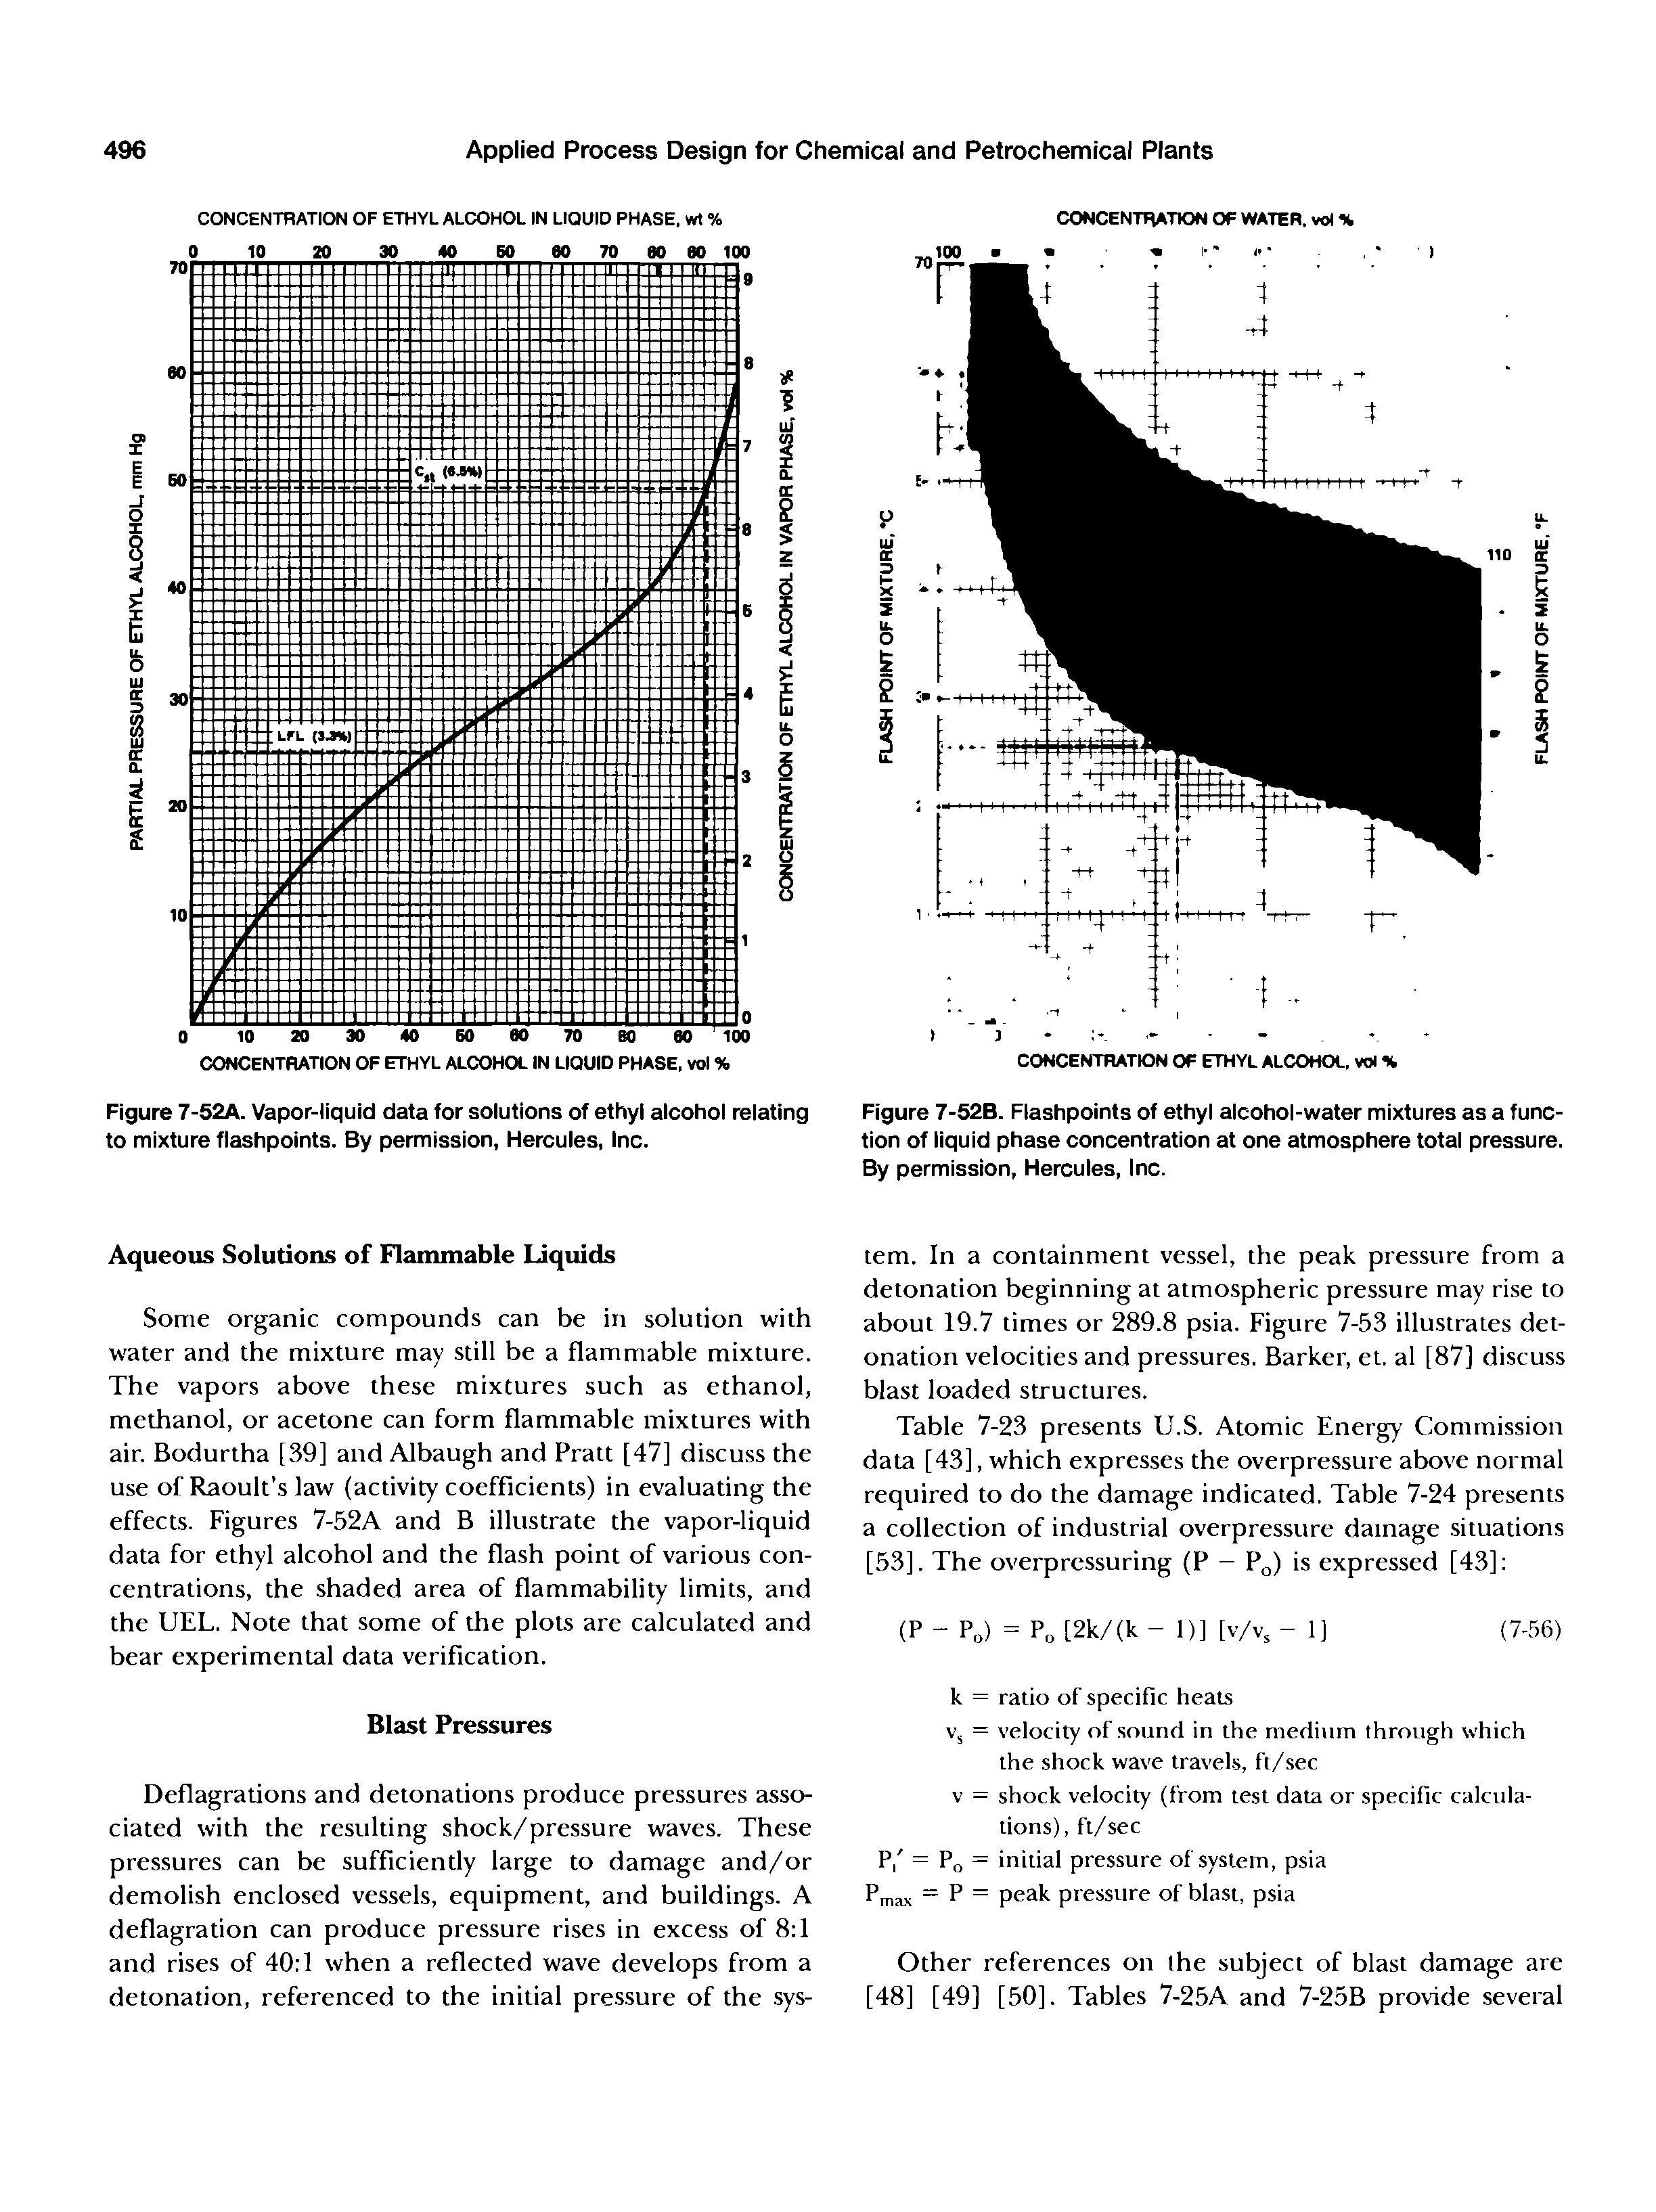 Figure 7-52A. Vapor-liquid data for solutions of ethyl alcohol relating to mixture flashpoints. By permission, Hercules, Inc.